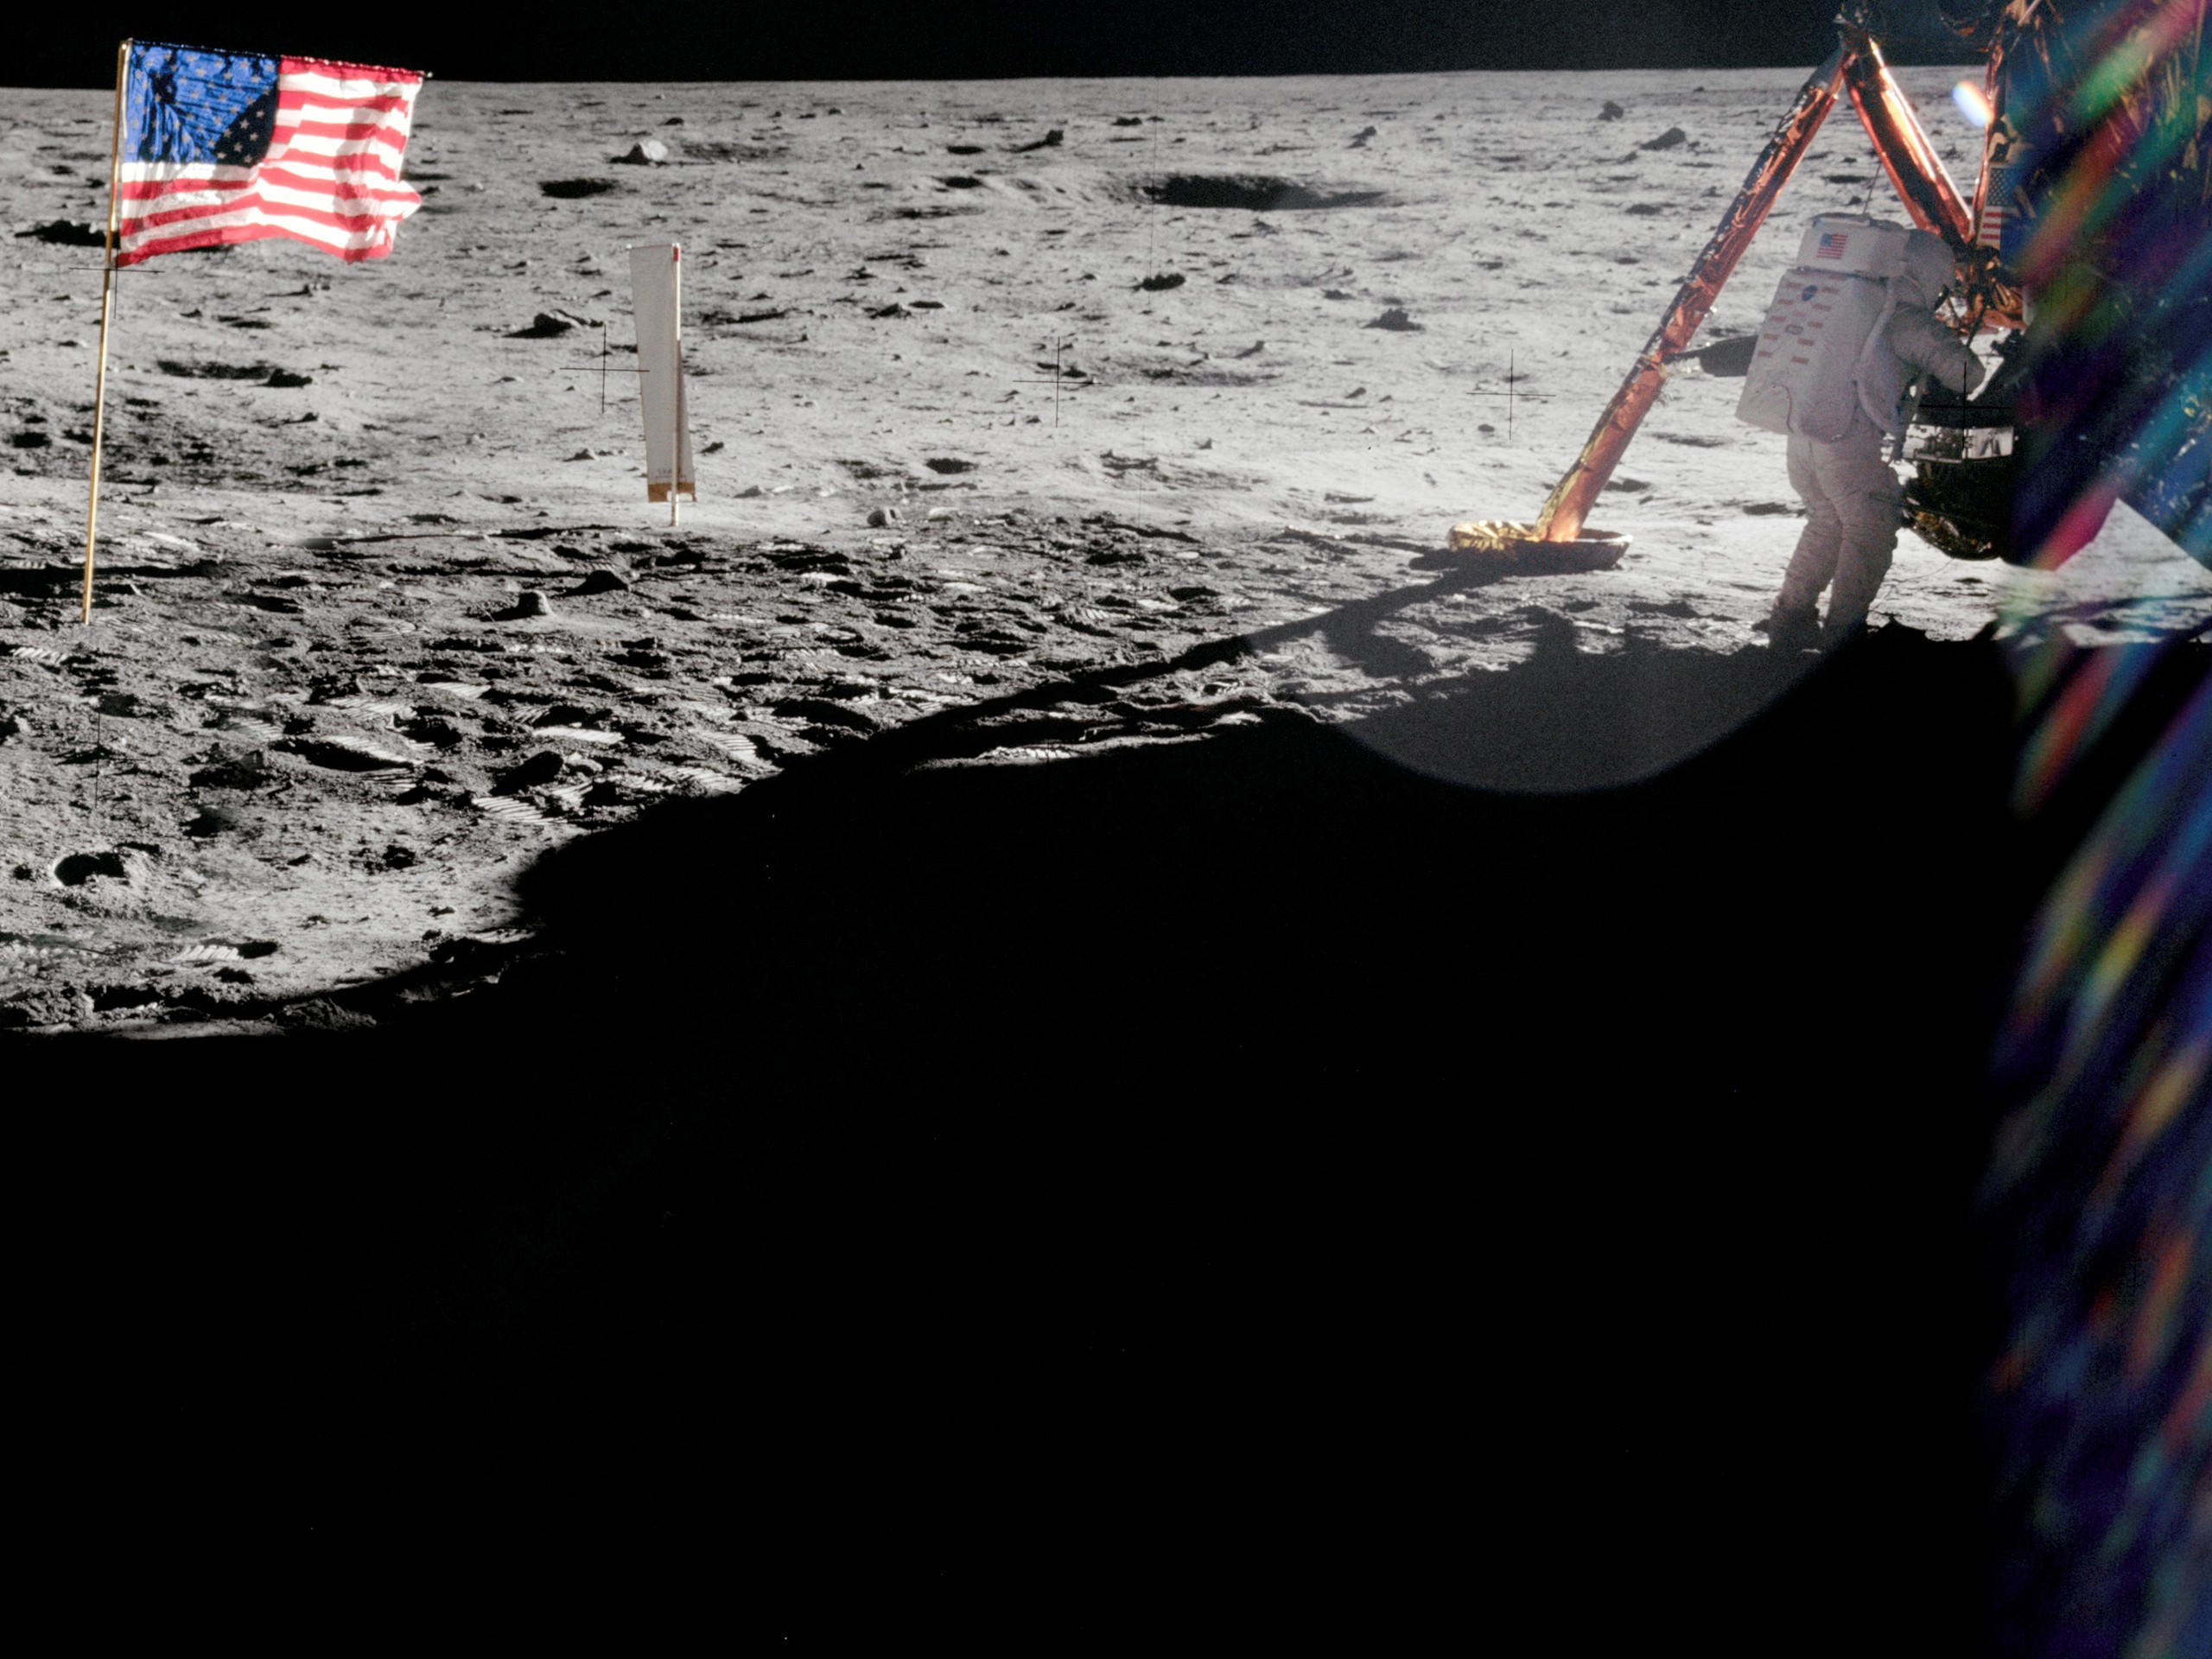 armstrong, On, The, Moon, Astronaut, Space Wallpaper